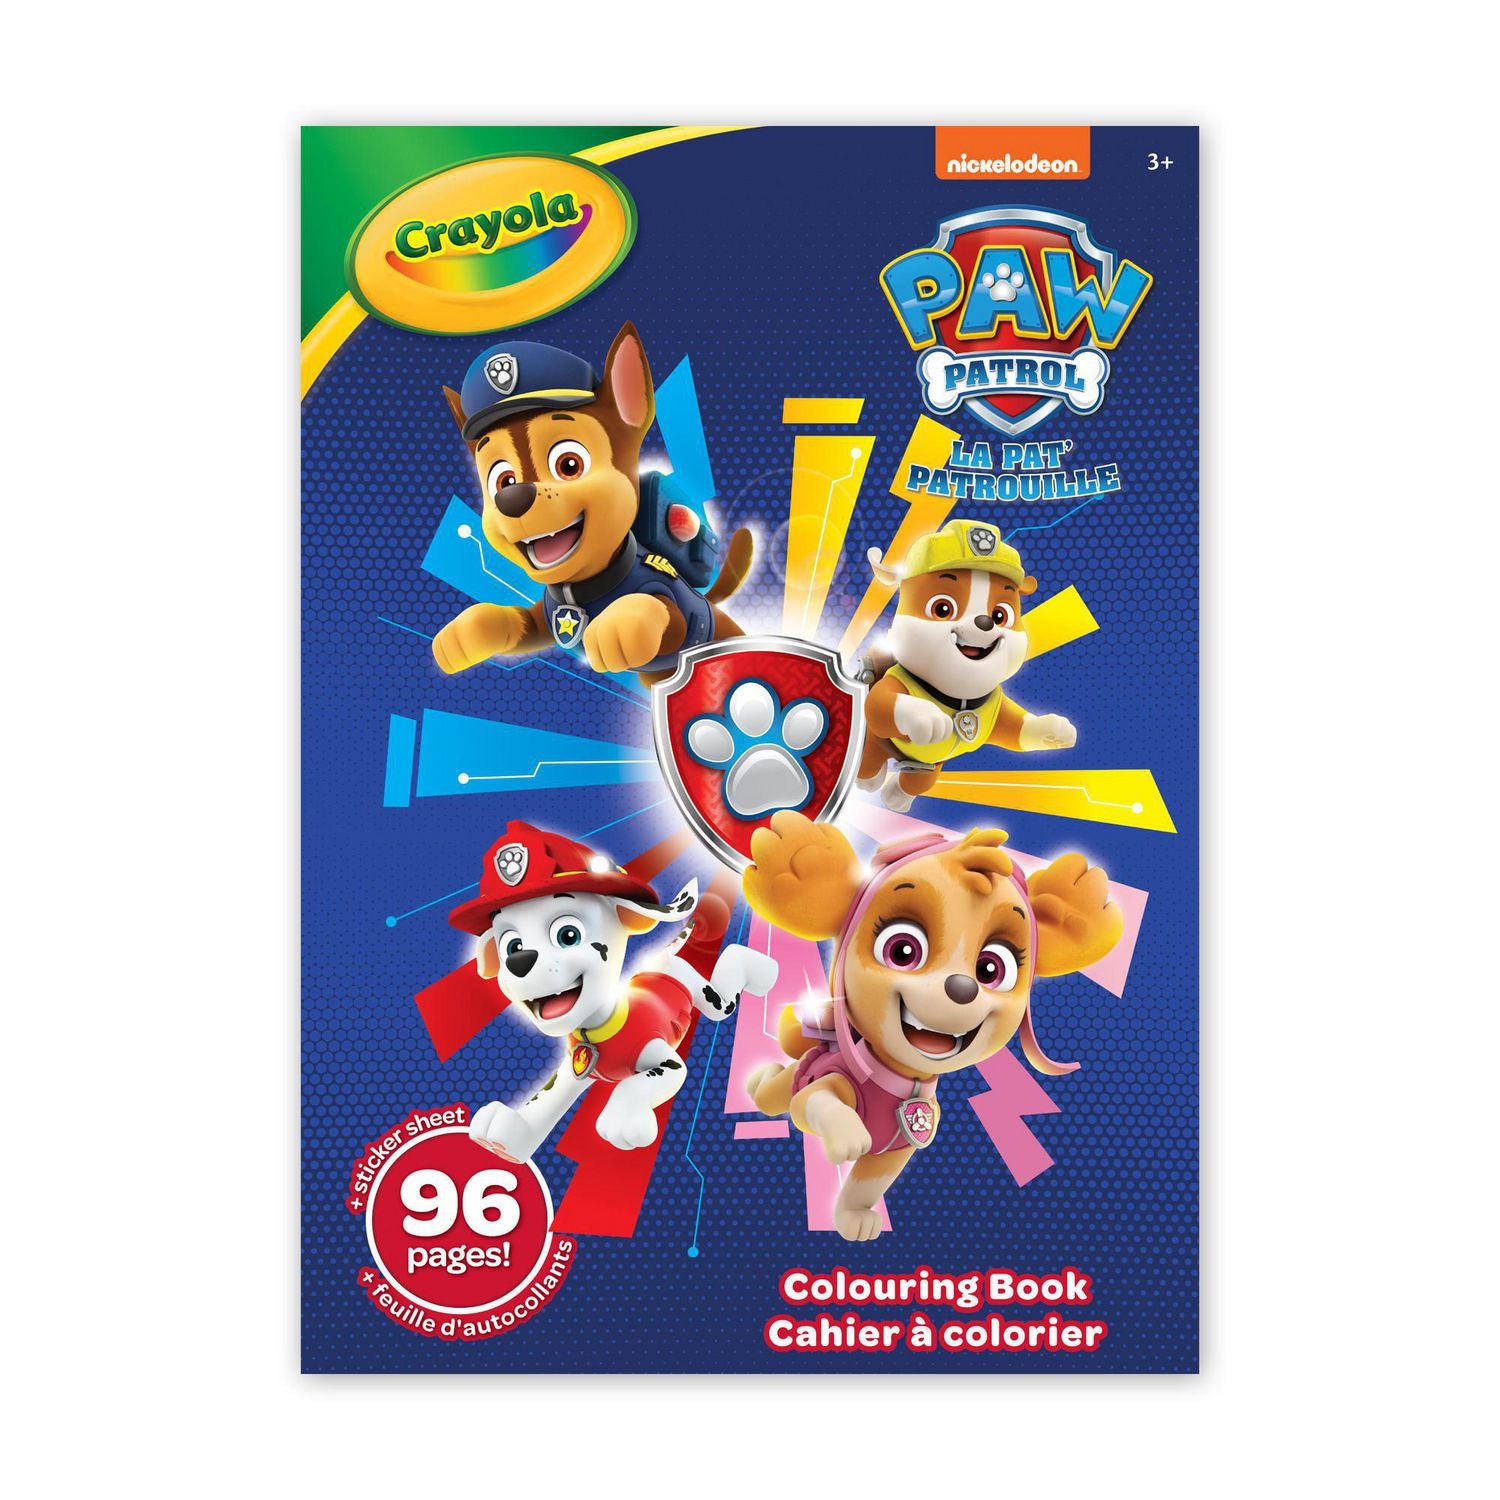 Crayola : Colouring Book / Paw Patrol 96 Pages